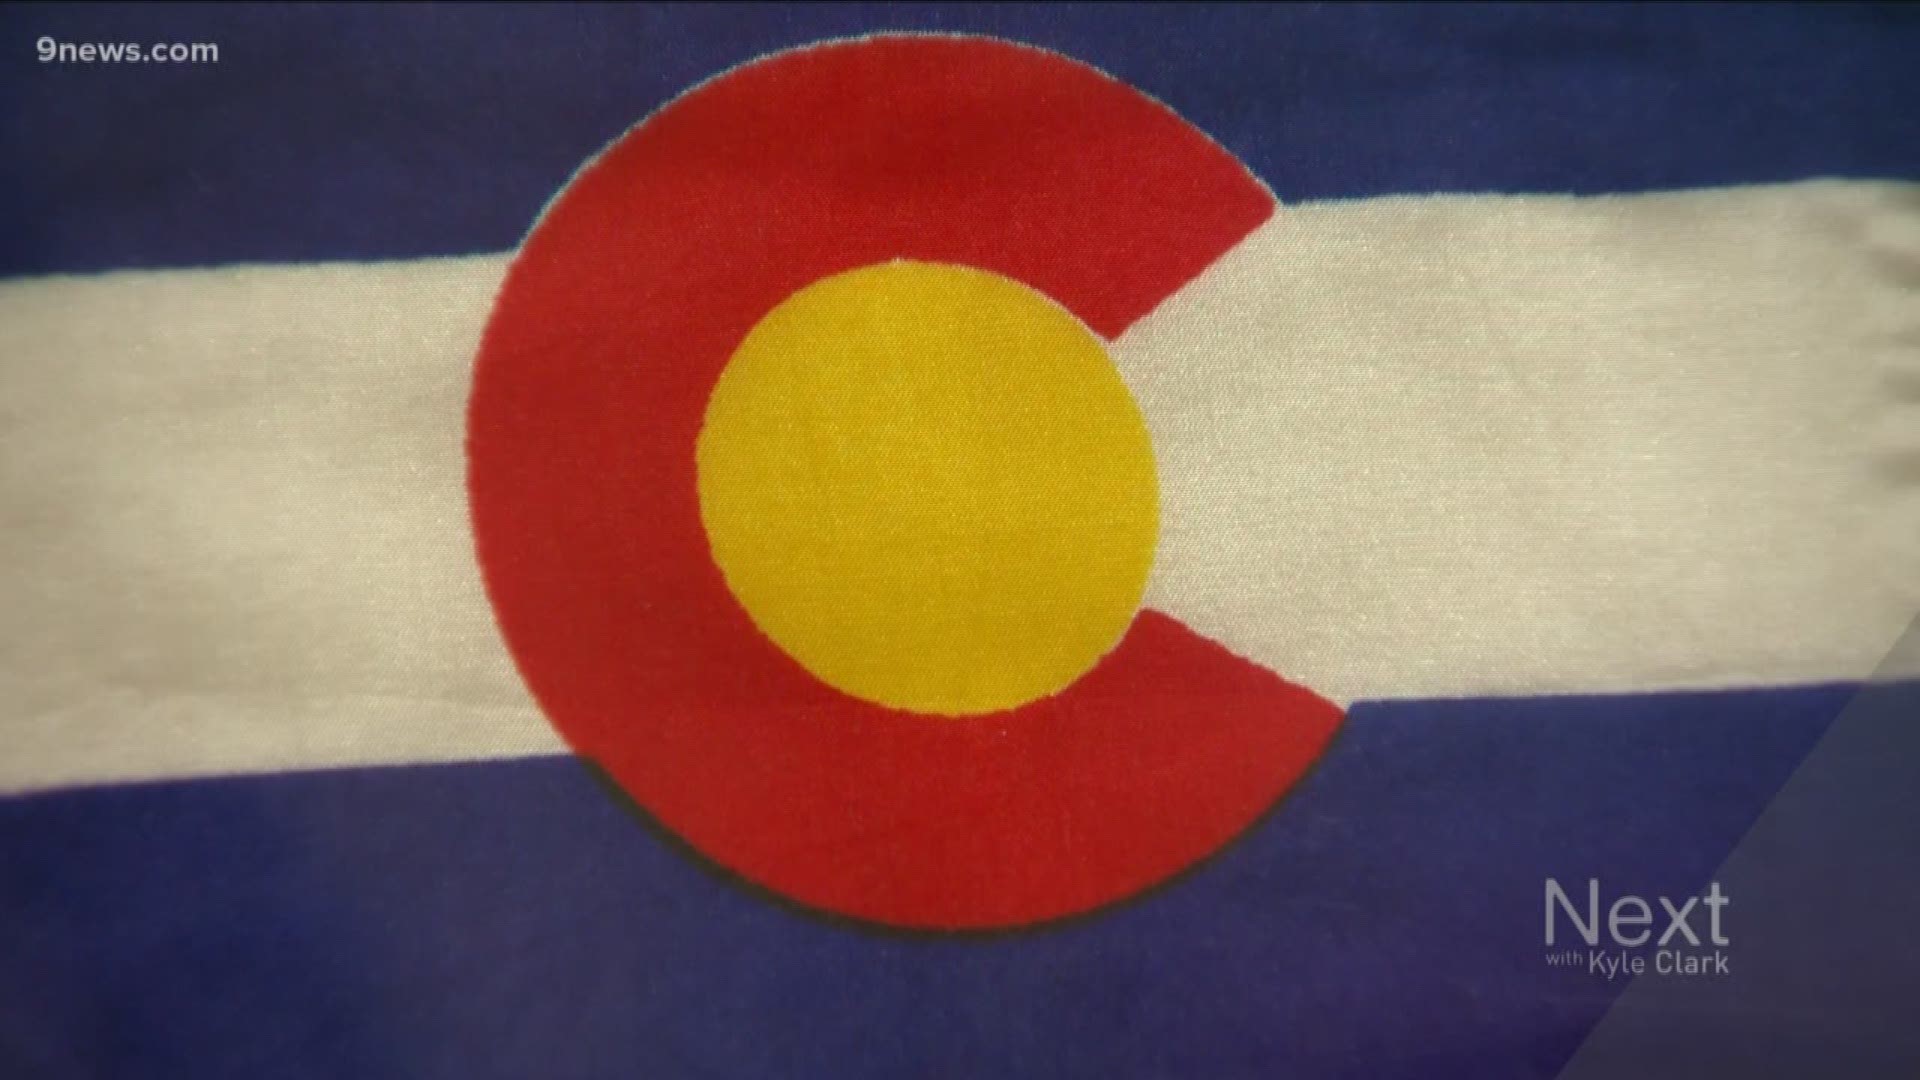 Colorado hasn't always had the best state flag in America (sorry South Carolina), but women fixed that 109 years ago this week.